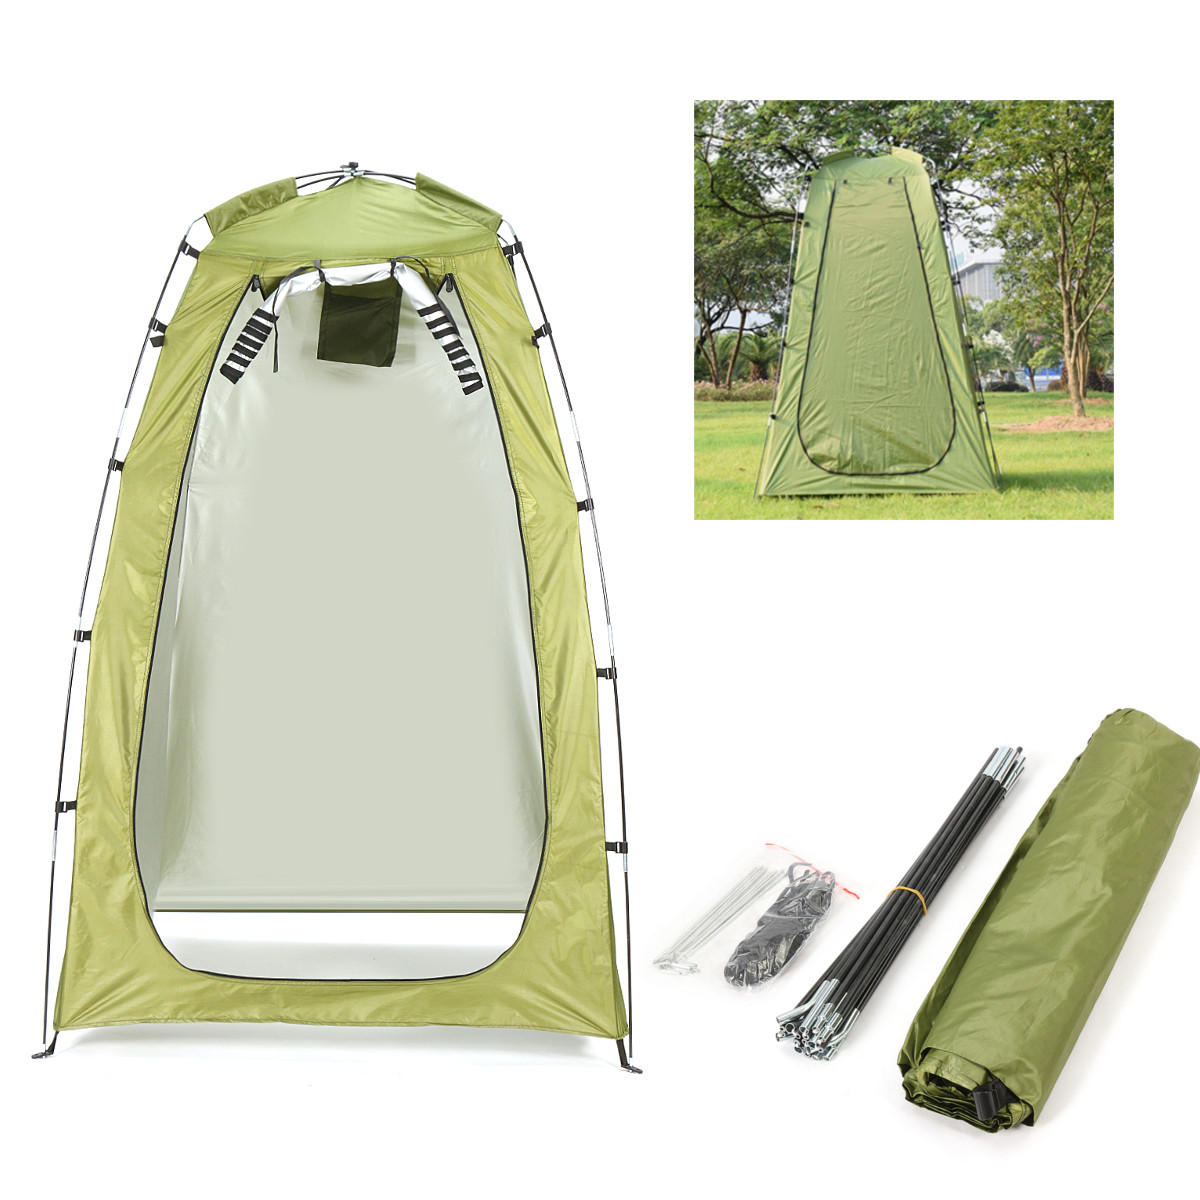 Outdoor Portable Fishing Tent Camping Shower Bathroom Toilet Changing Room